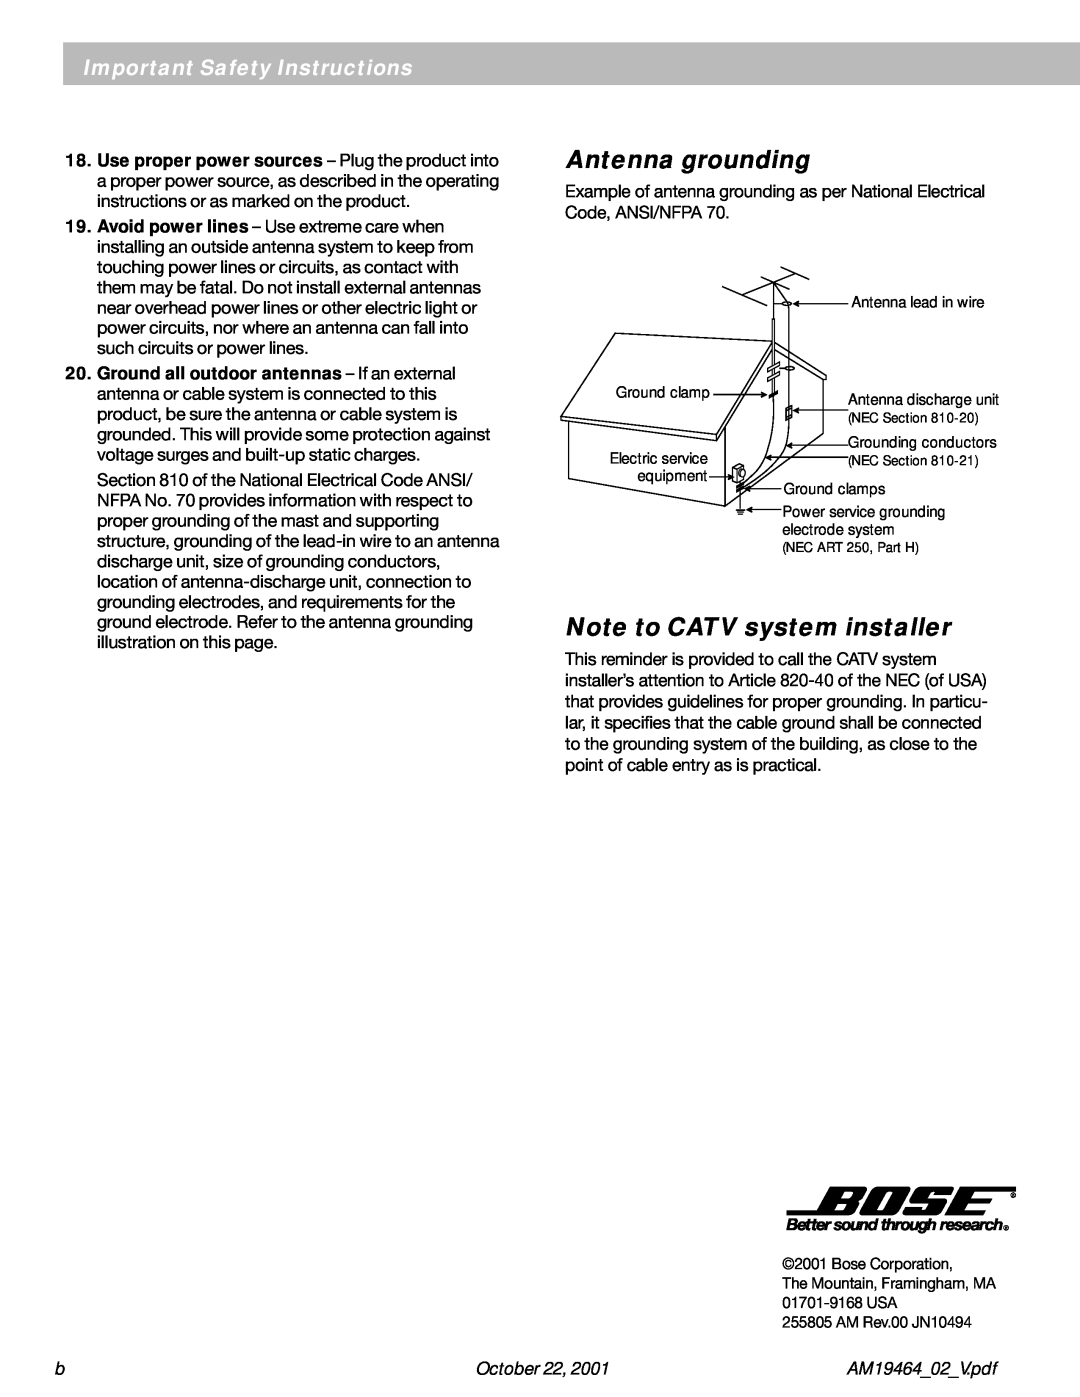 Bose 10 Series II manual Antenna grounding, Note to CATV system installer, Important Safety Instructions, October 